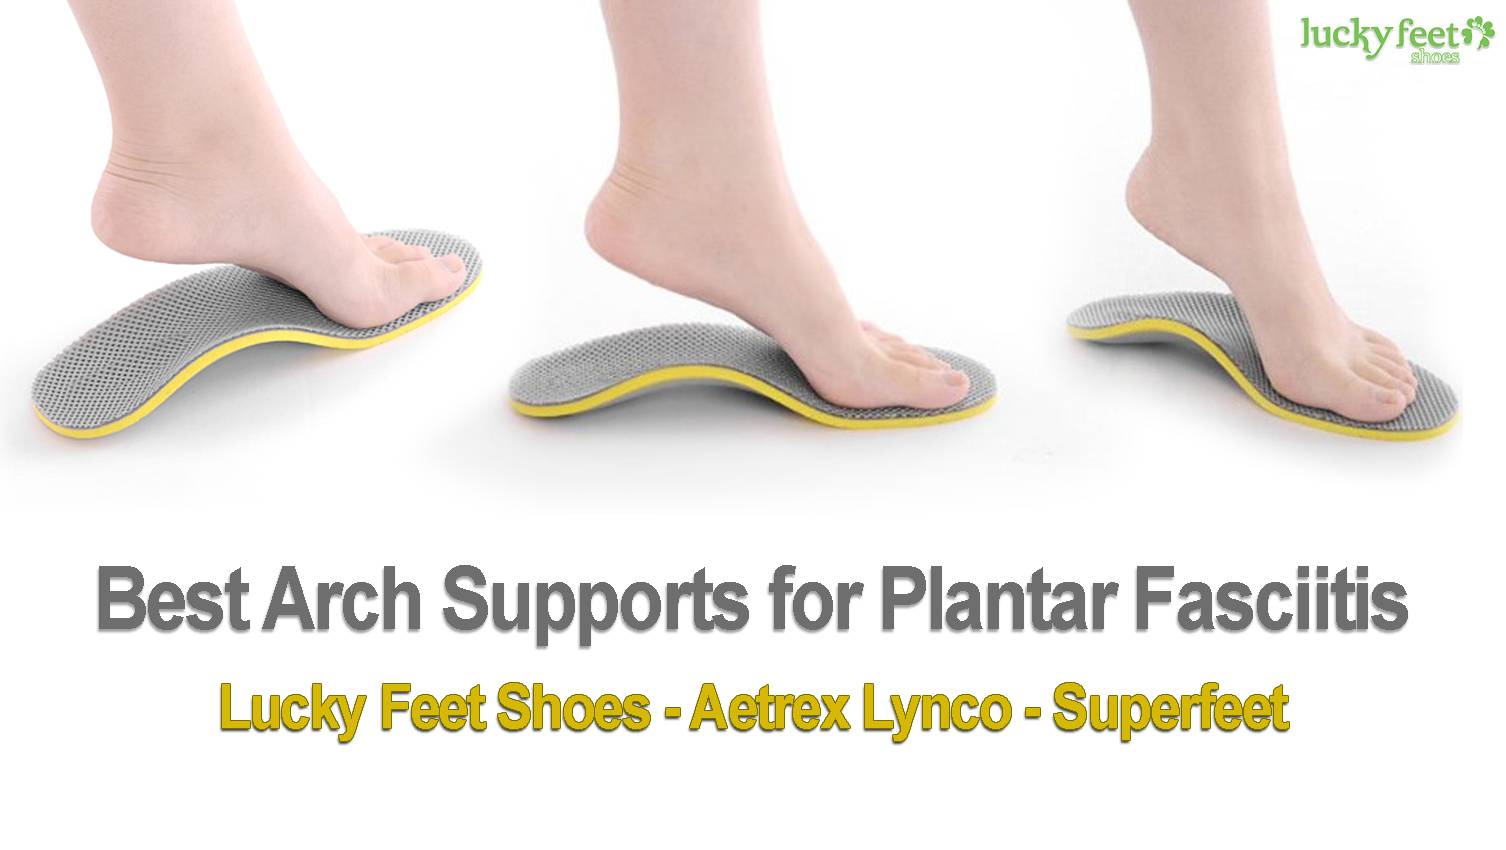 shoes with the best arch support